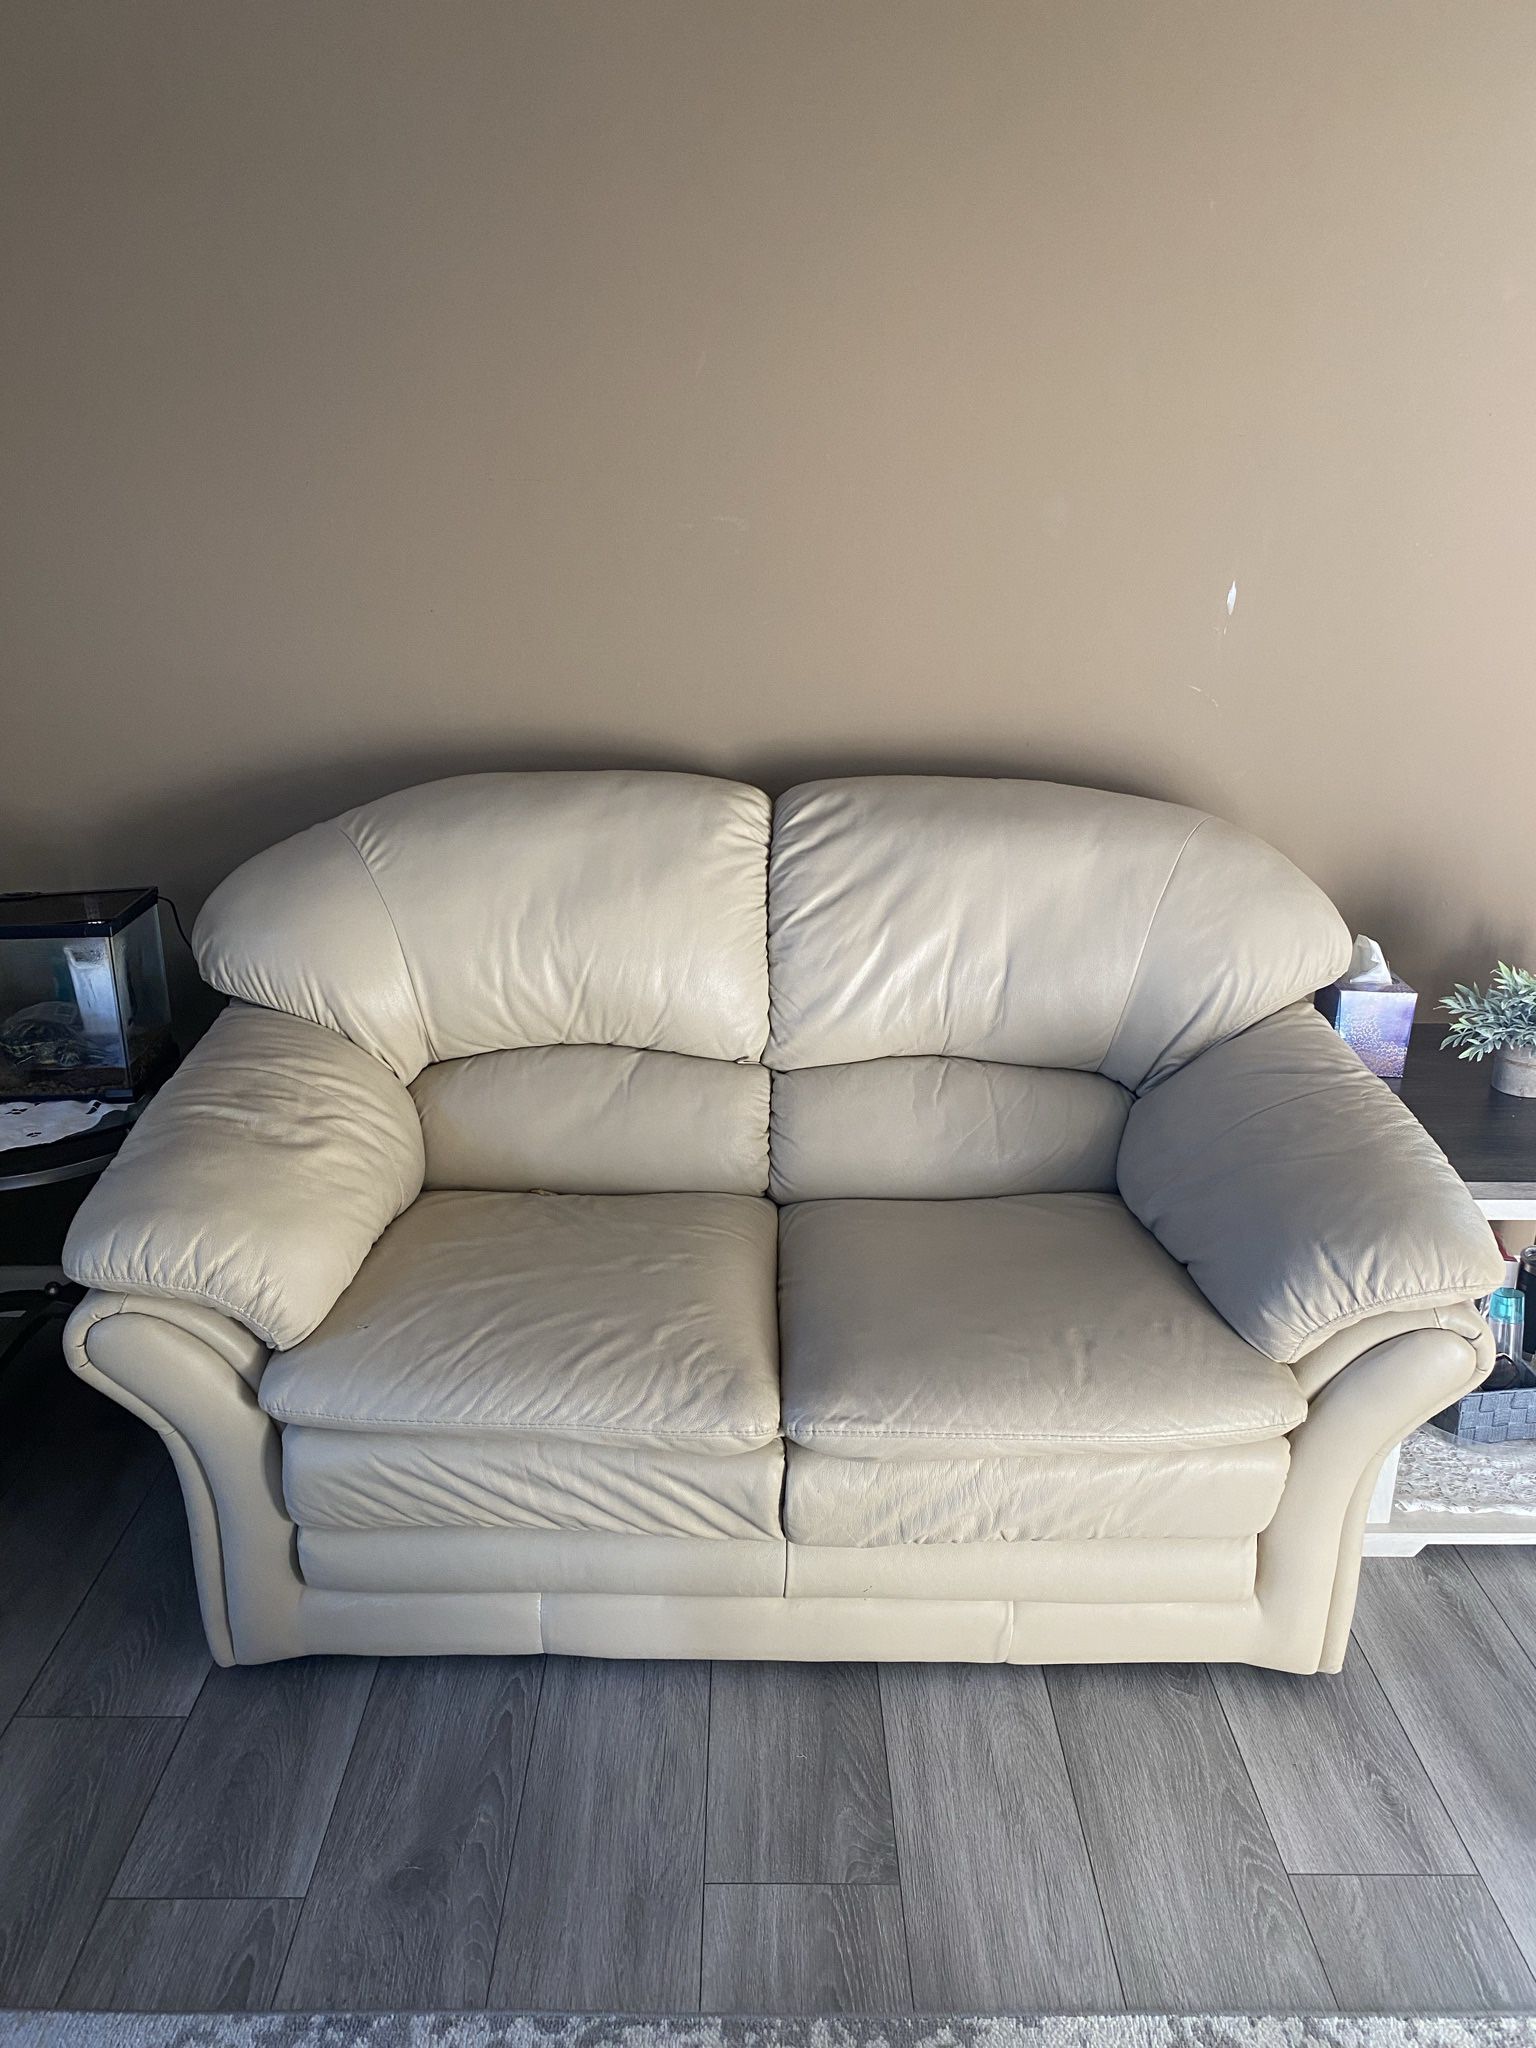 Leather Love Seat And Chair Cream Colored